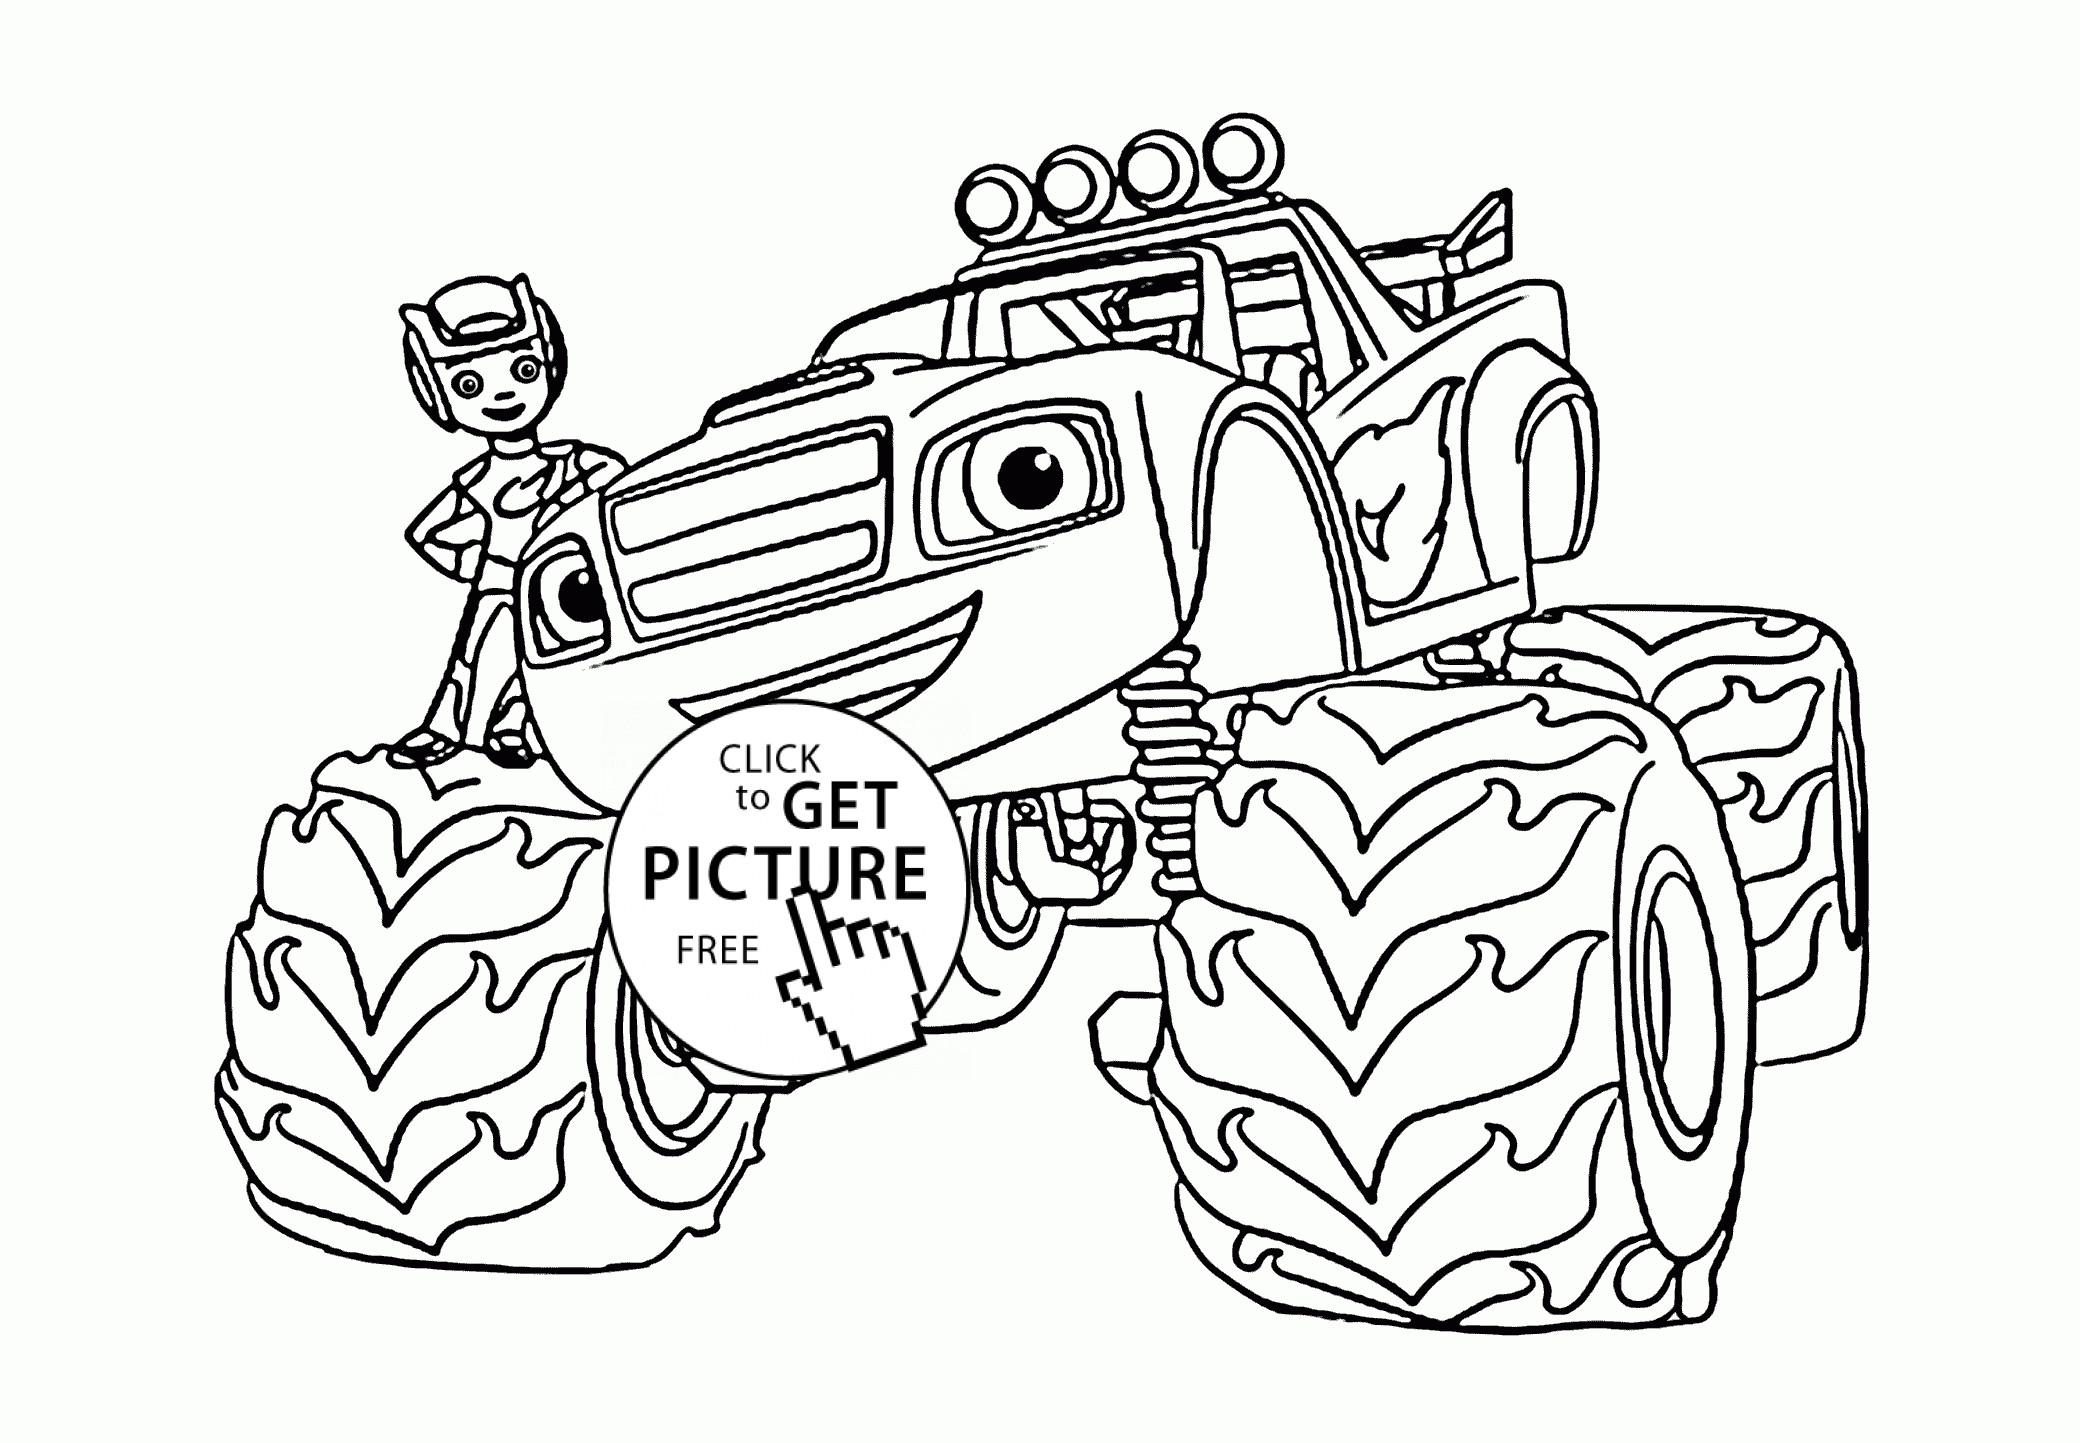 Free Coloring Pages-Boys Cars &amp; Trucks
 Blaze Monster Truck with Boy coloring page for kids